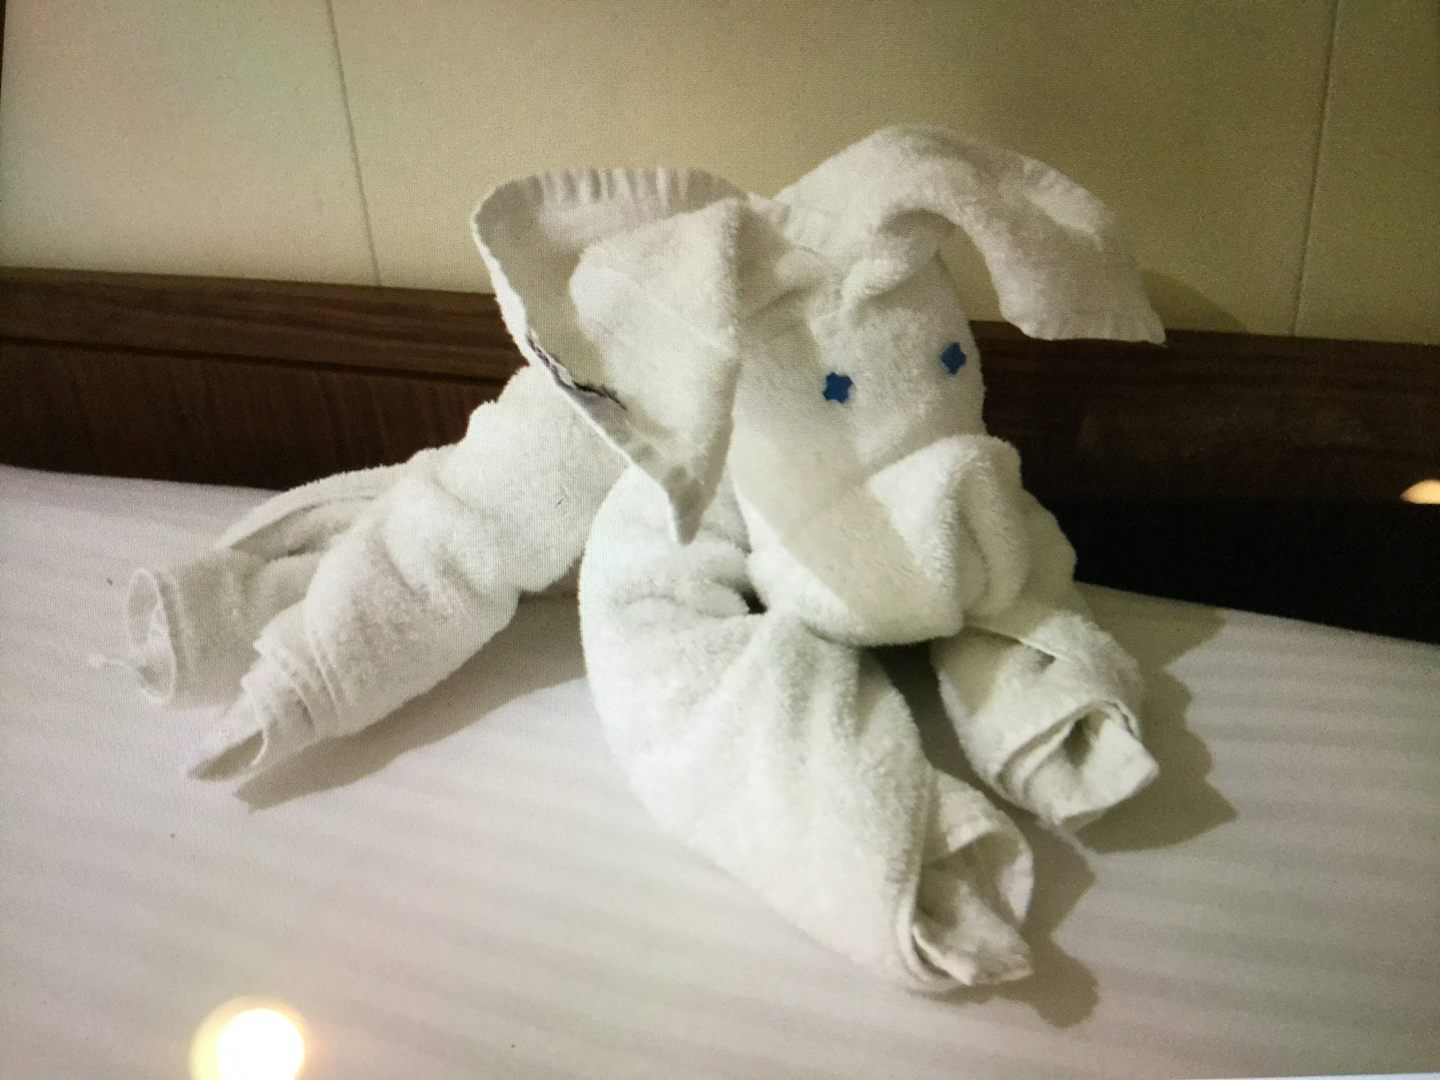 Towel animal was made at the room by our housekeeper.